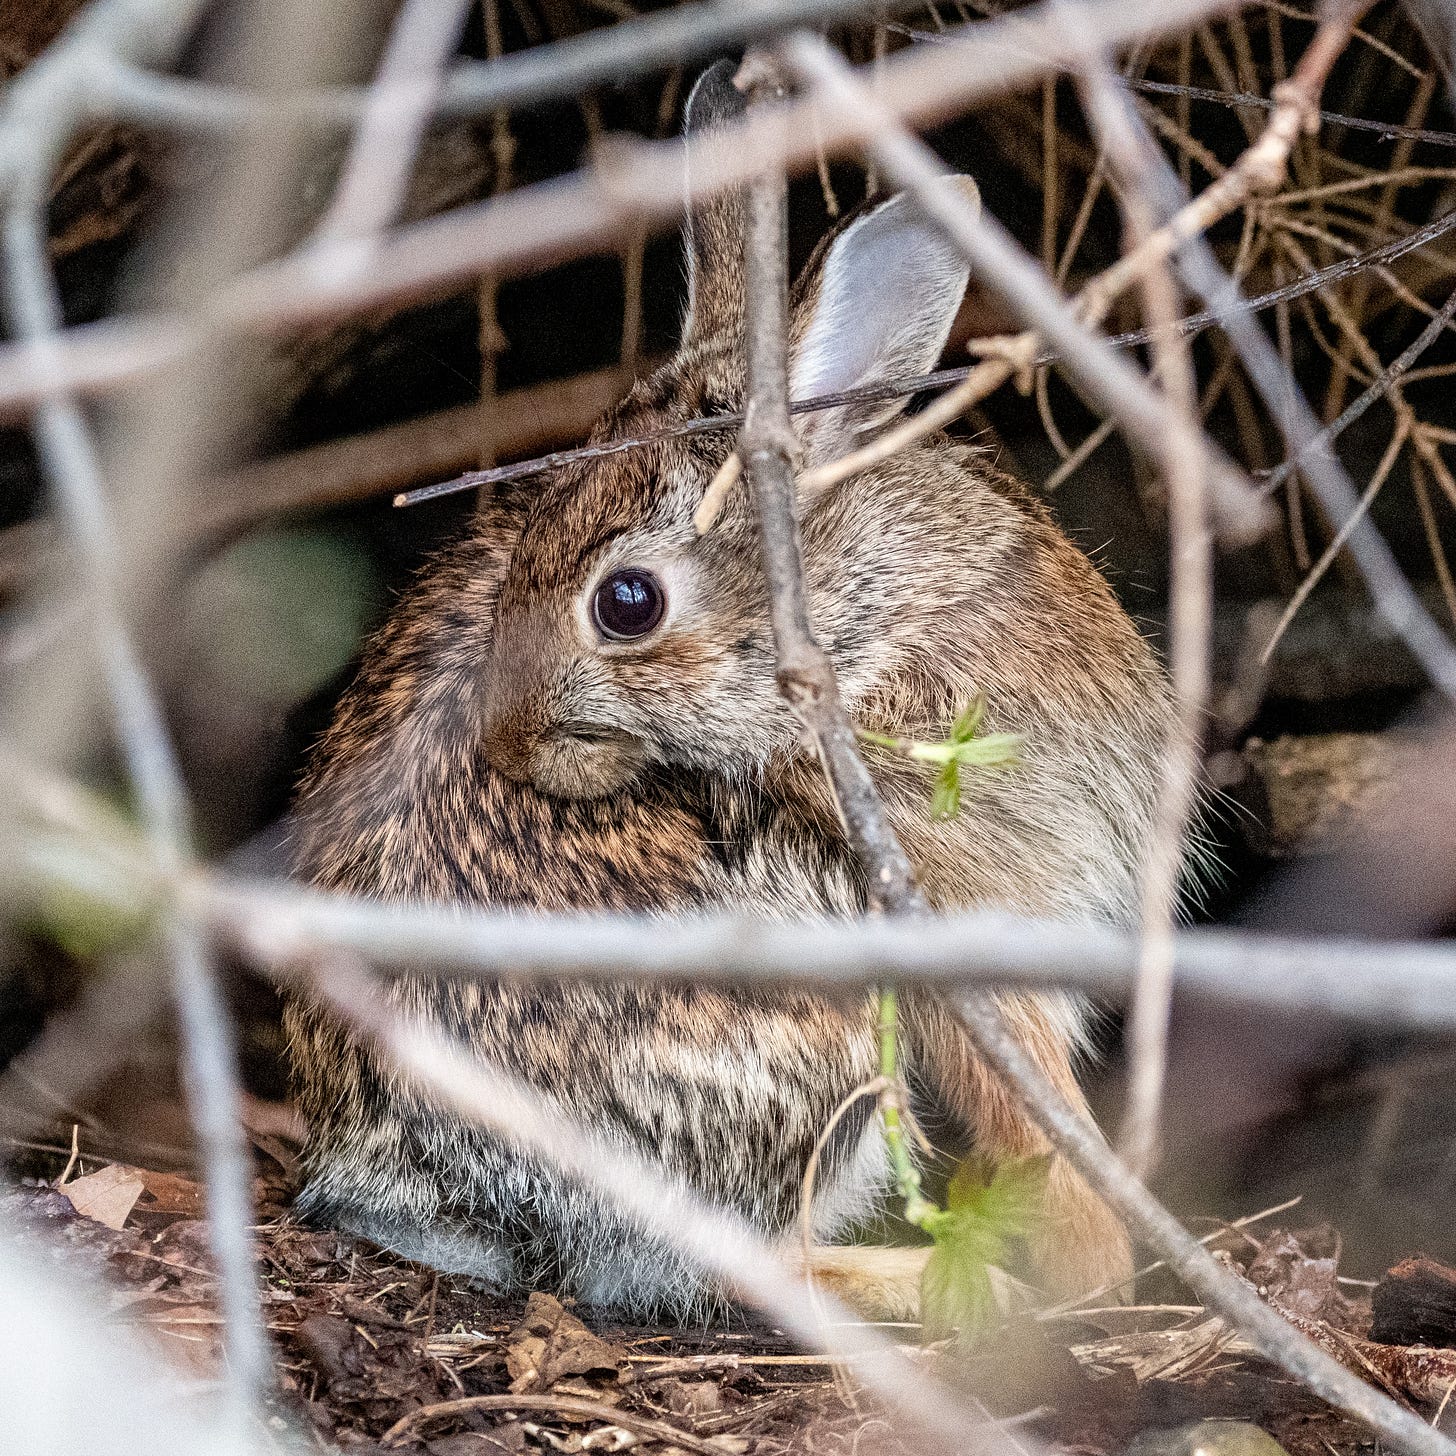 A brindled rabbit, nibbling at an itchy spot on its flank, eyes the camera from its hiding place under a fallen tree